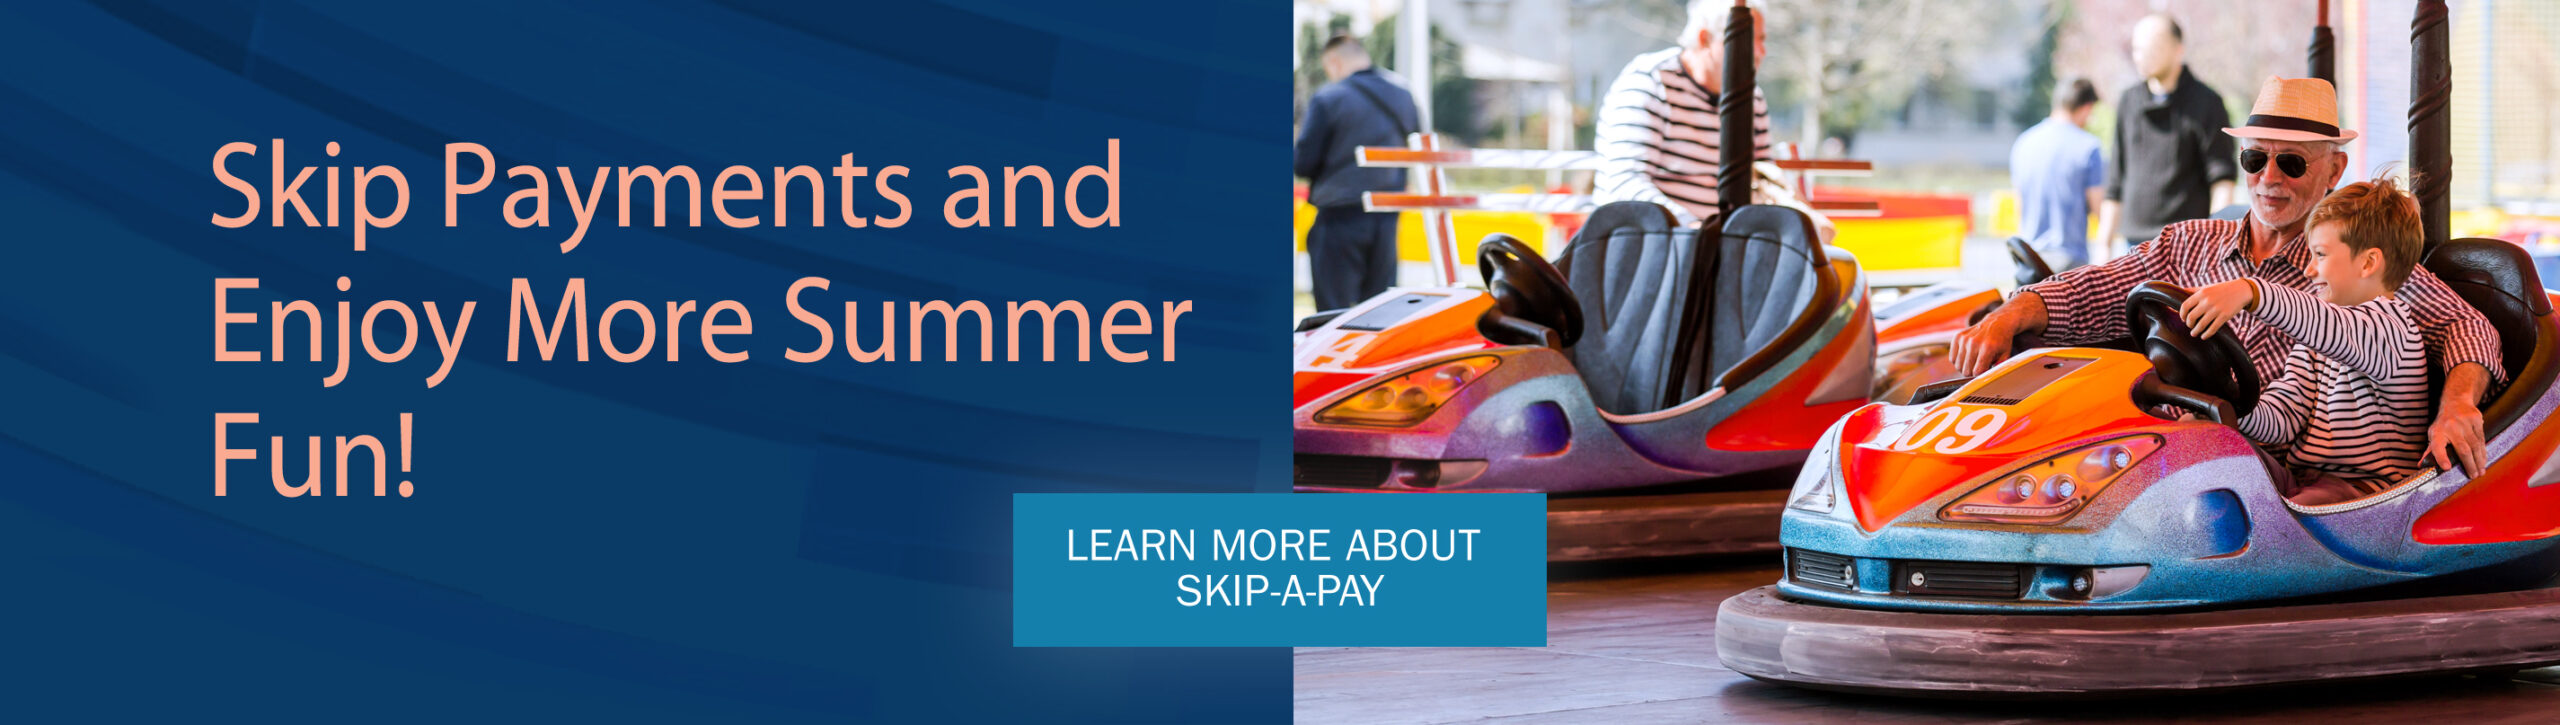 grandfather and grandson enjoy carnival rides. Skip payments and enjoy more summer fun!